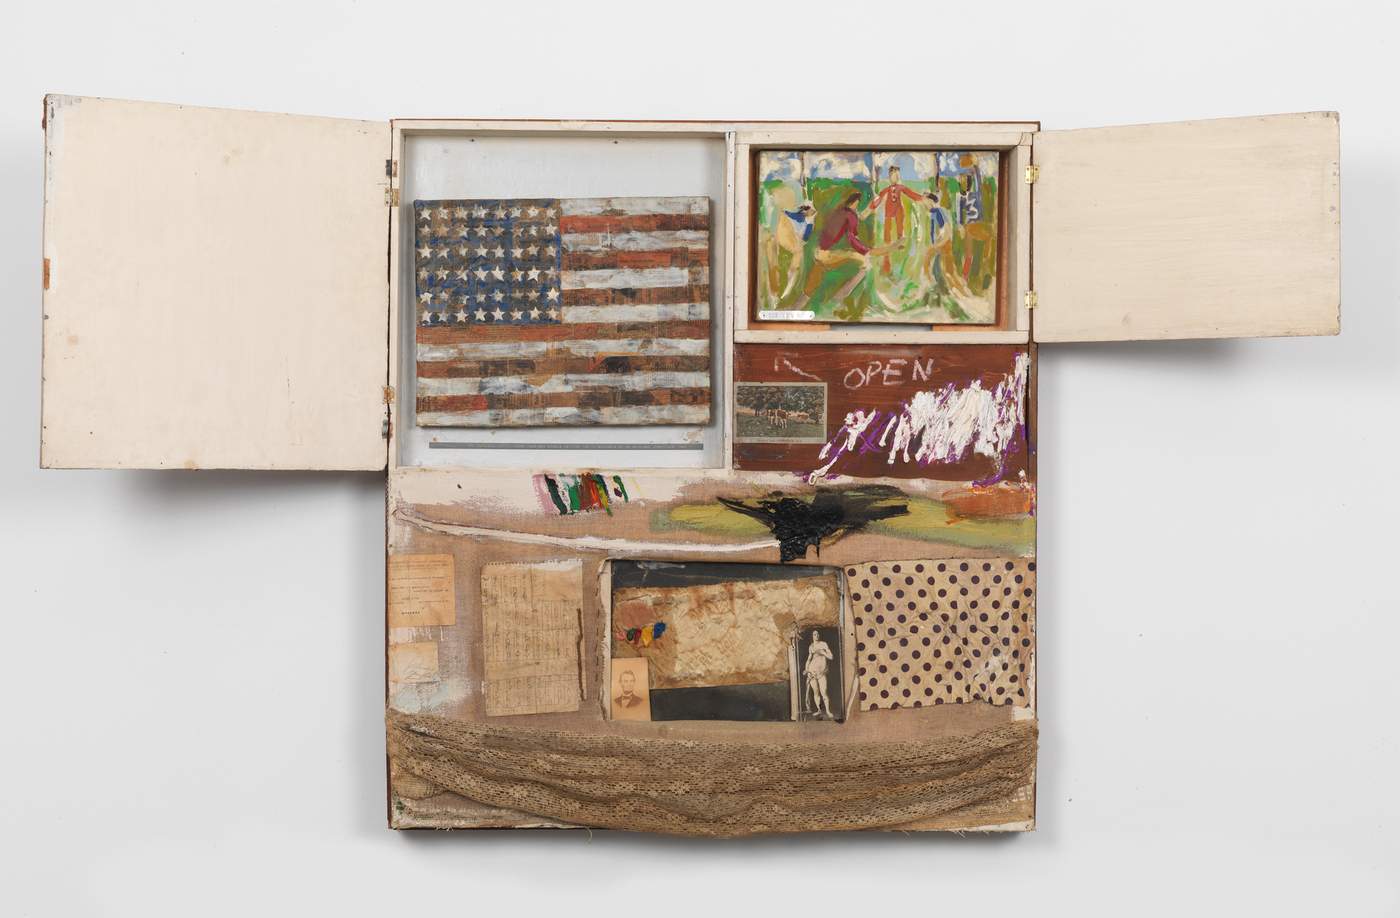 Short Circuit 1955. Combine containing painting by Susan Weil and Jasper Johns Flag painting (reproduction by Elaine Sturtevant) © Robert Rauschenberg Foundation